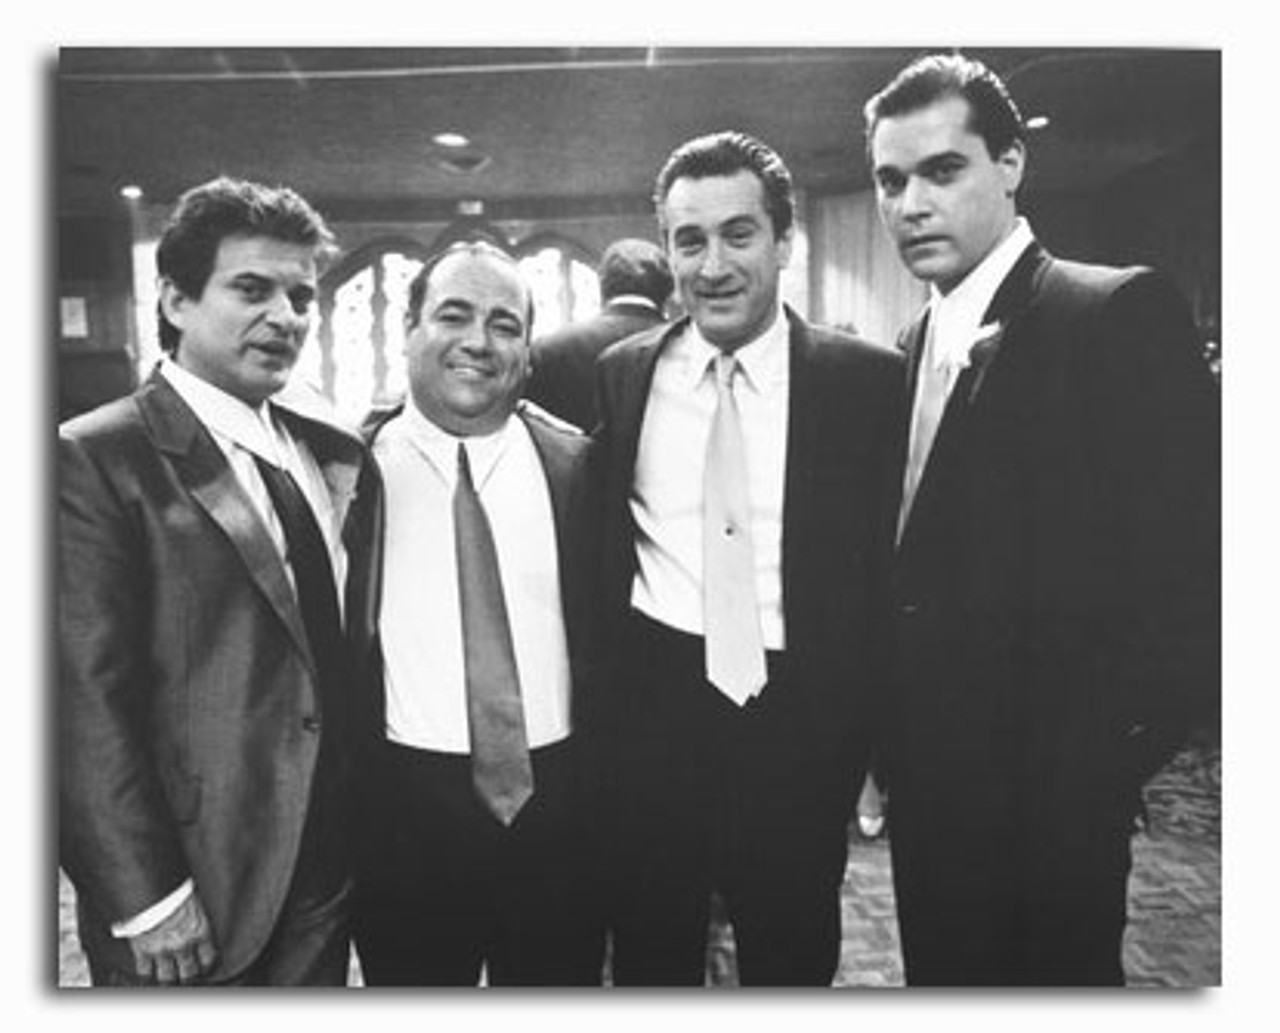 Ss2304705   Photograph Of Robert De Niro As Jimmy Conway Ray Liotta As Henry Hill Joe Pesci As Tommy Devito From Goodfellas Available In 4 Sizes Framed Or Unframed Buy Now At Starstills  79160  17206.1394487949 ?c=2?imbypass=on